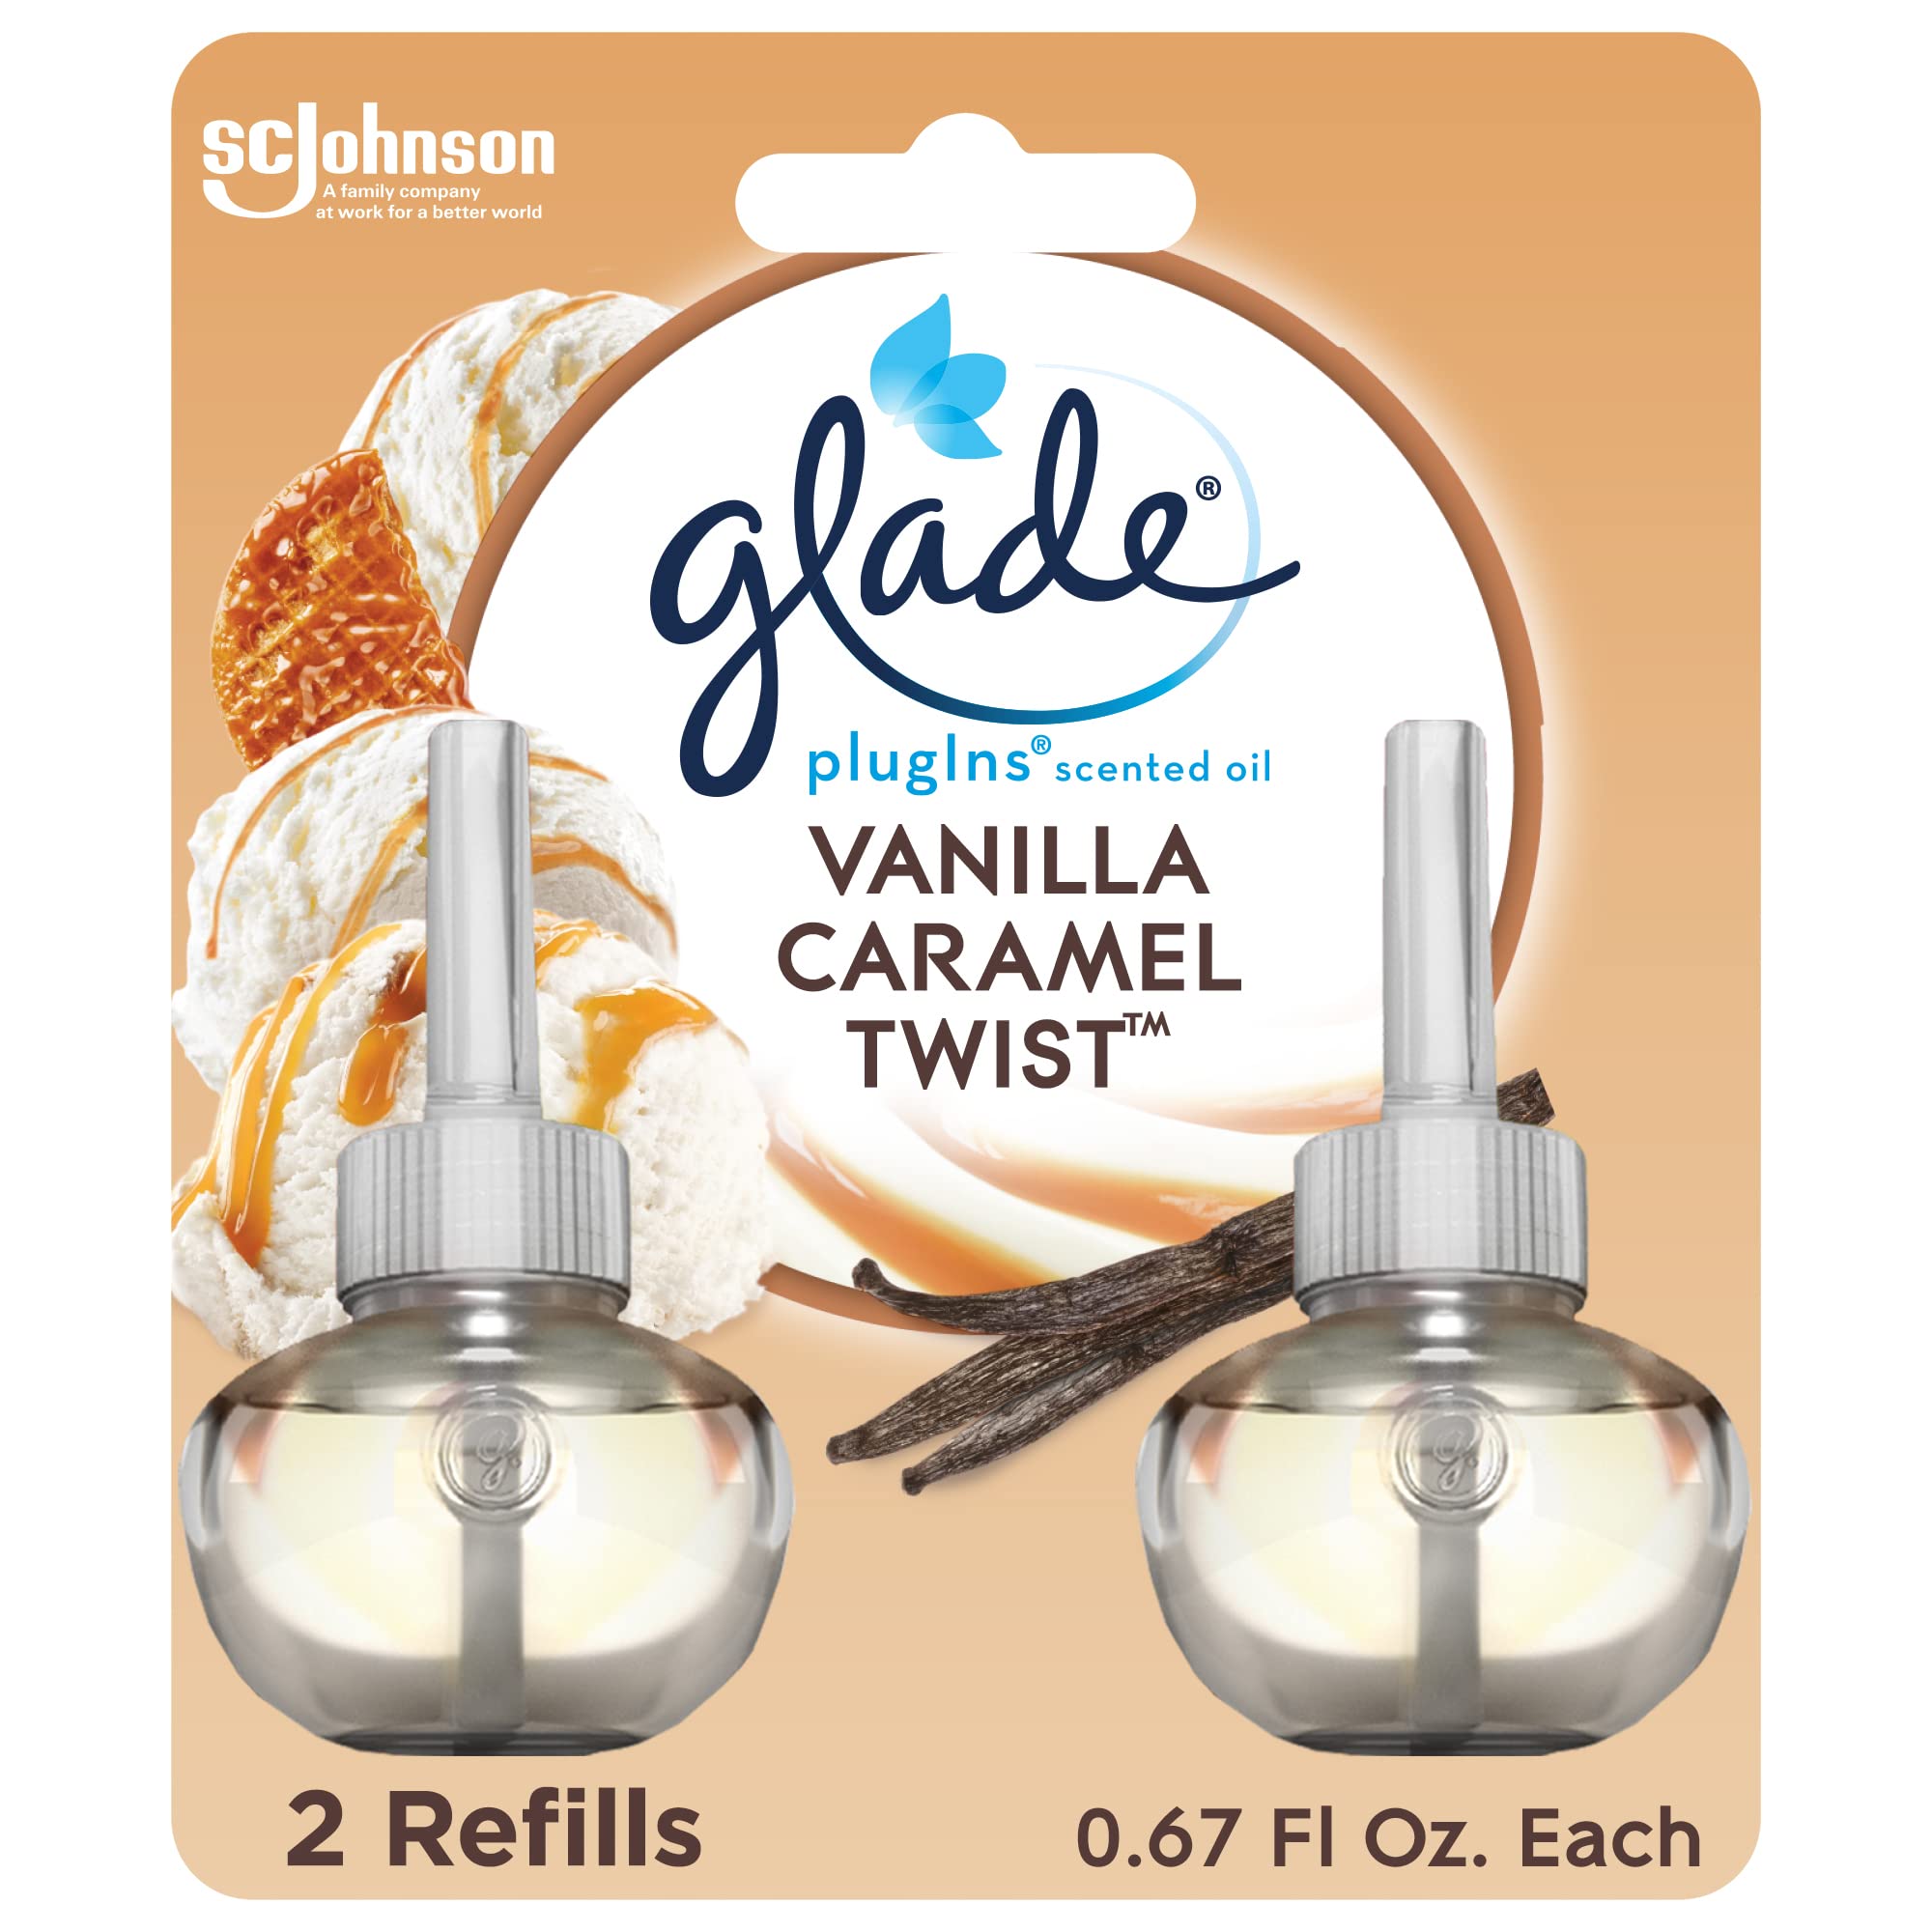 Buy Glade PlugIns Scented Oil Air Freshener Refill 1.34 Oz.